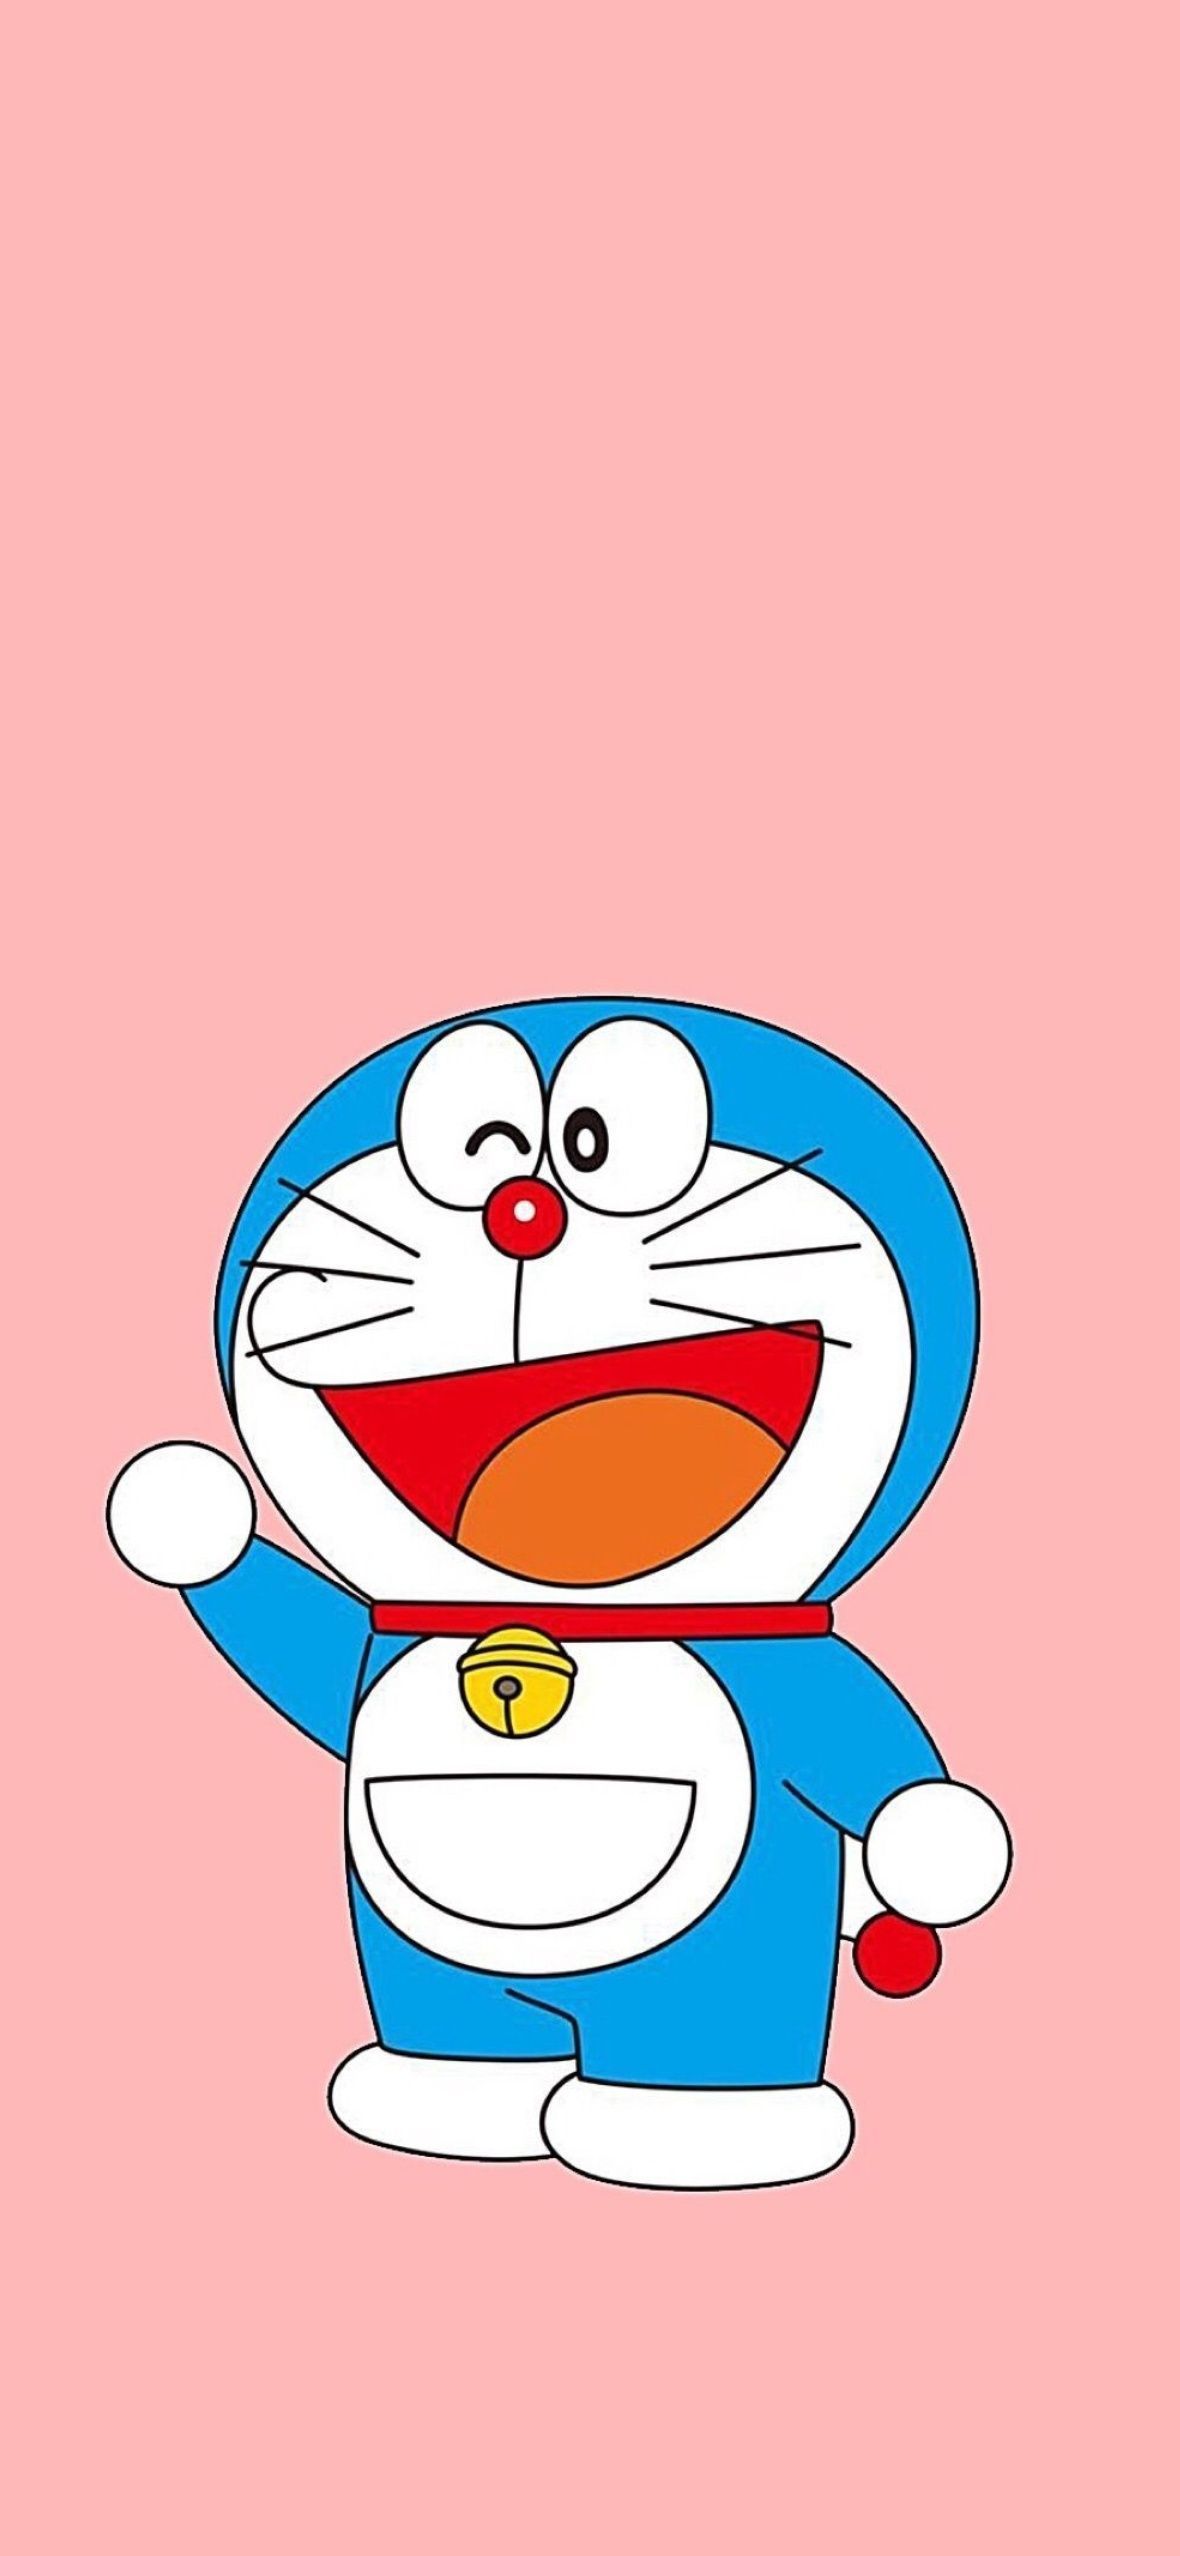 Doraemon Wallpapers iPhone with high-resolution 1080x1920 pixel. You can use this wallpaper for your iPhone 5, 6, 7, 8, X, XS, XR backgrounds, Mobile Screensaver, or iPad Lock Screen - Doraemon